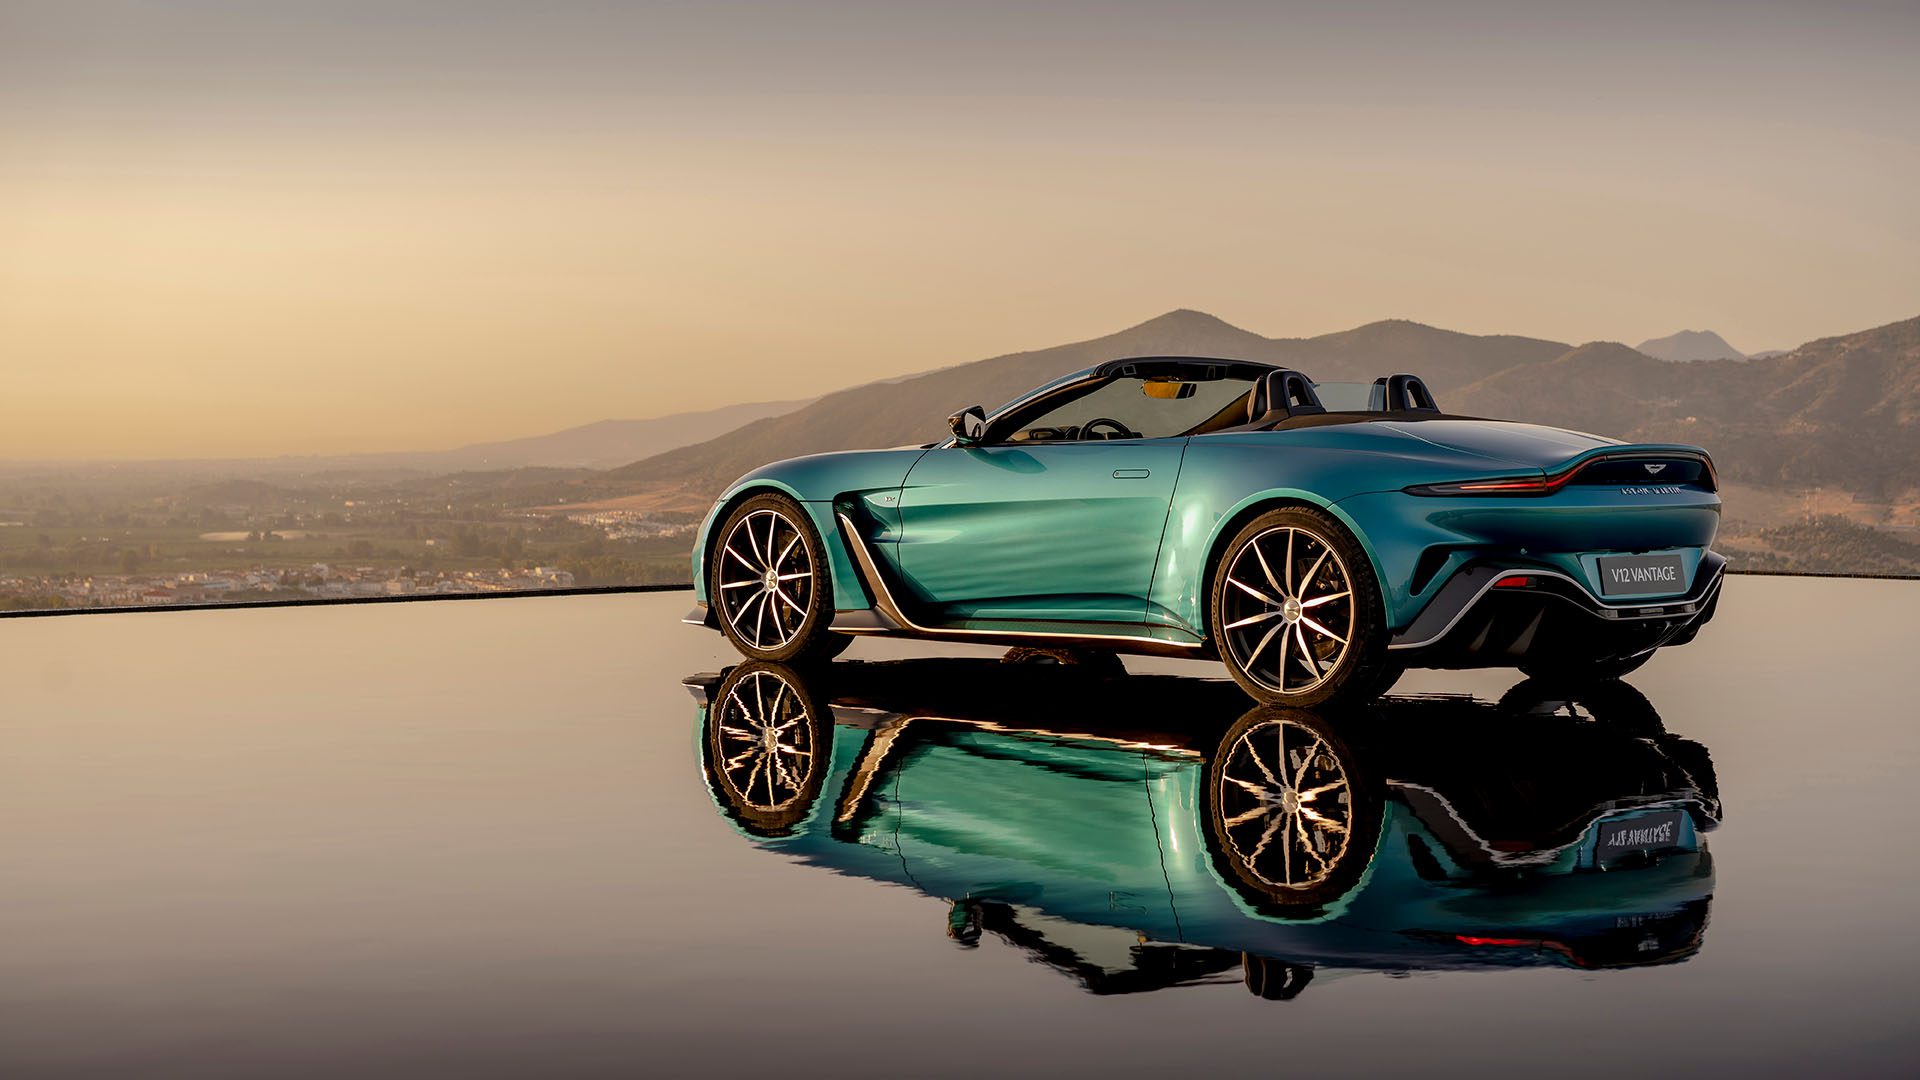 Next road trip in style with Aston Martin’s V12 Vantage Roadster